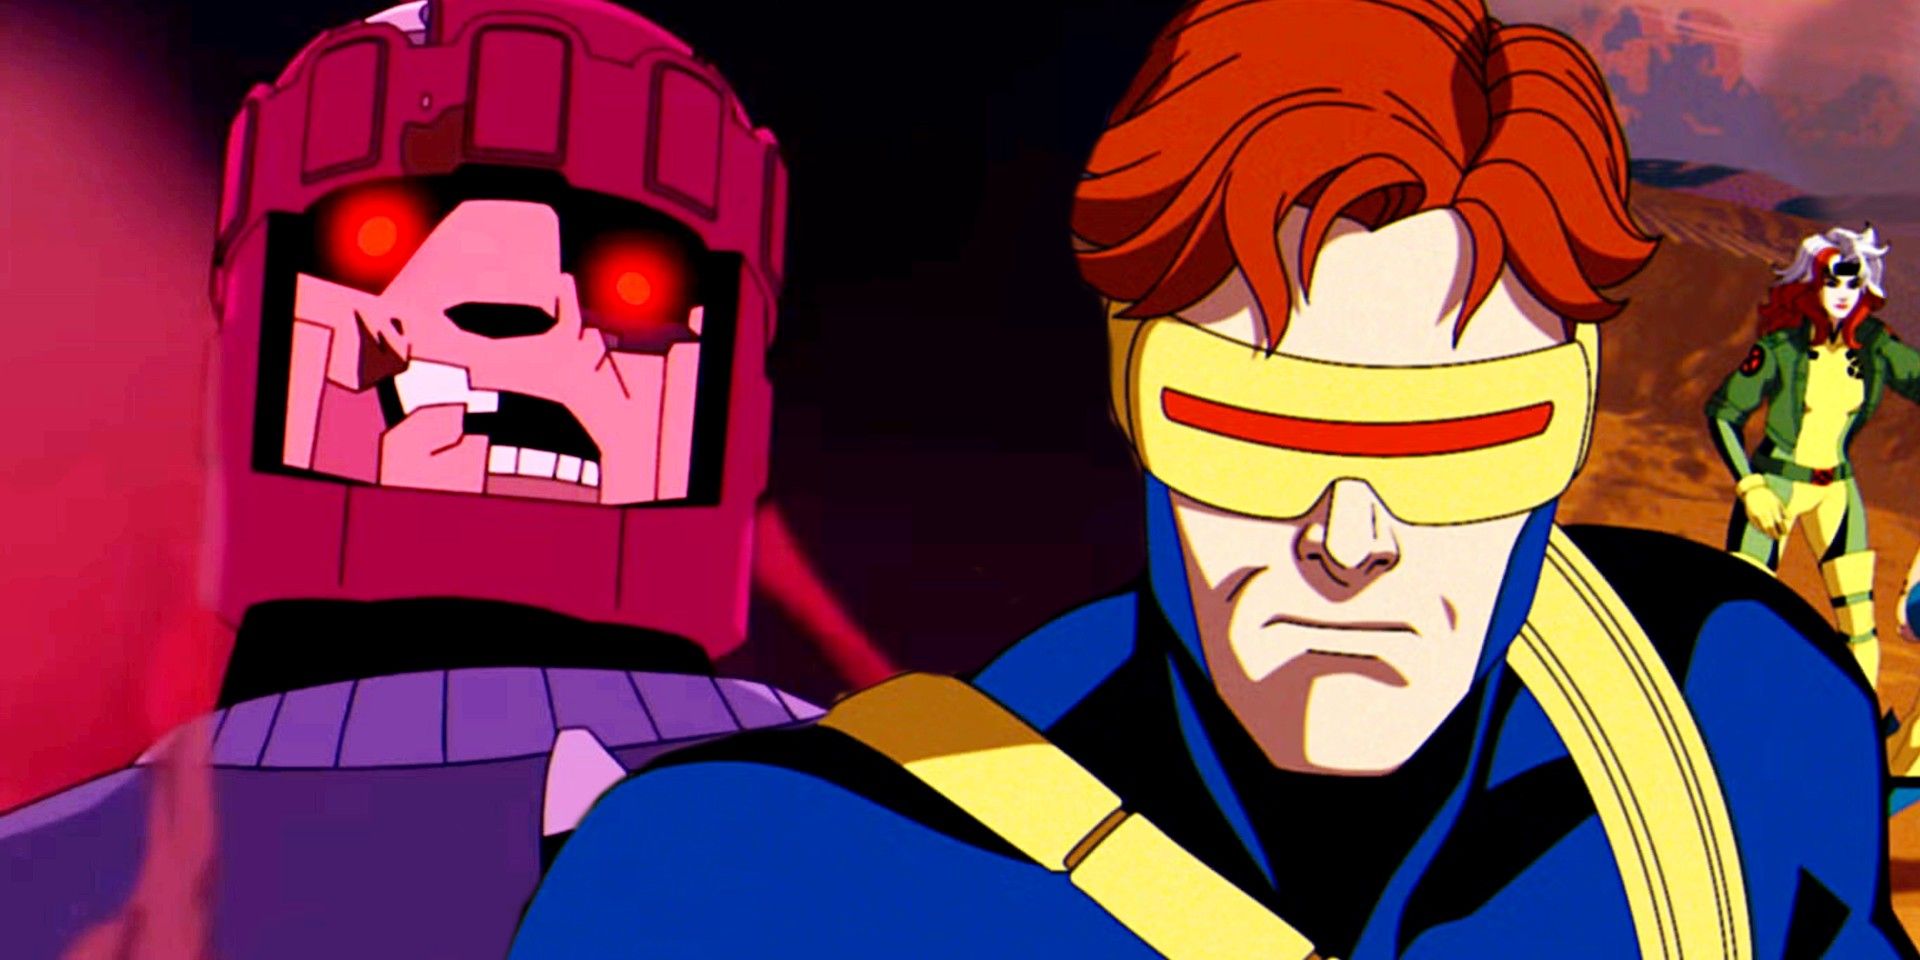 Sentinels in X-Men '97 next to Cyclops and Rogue